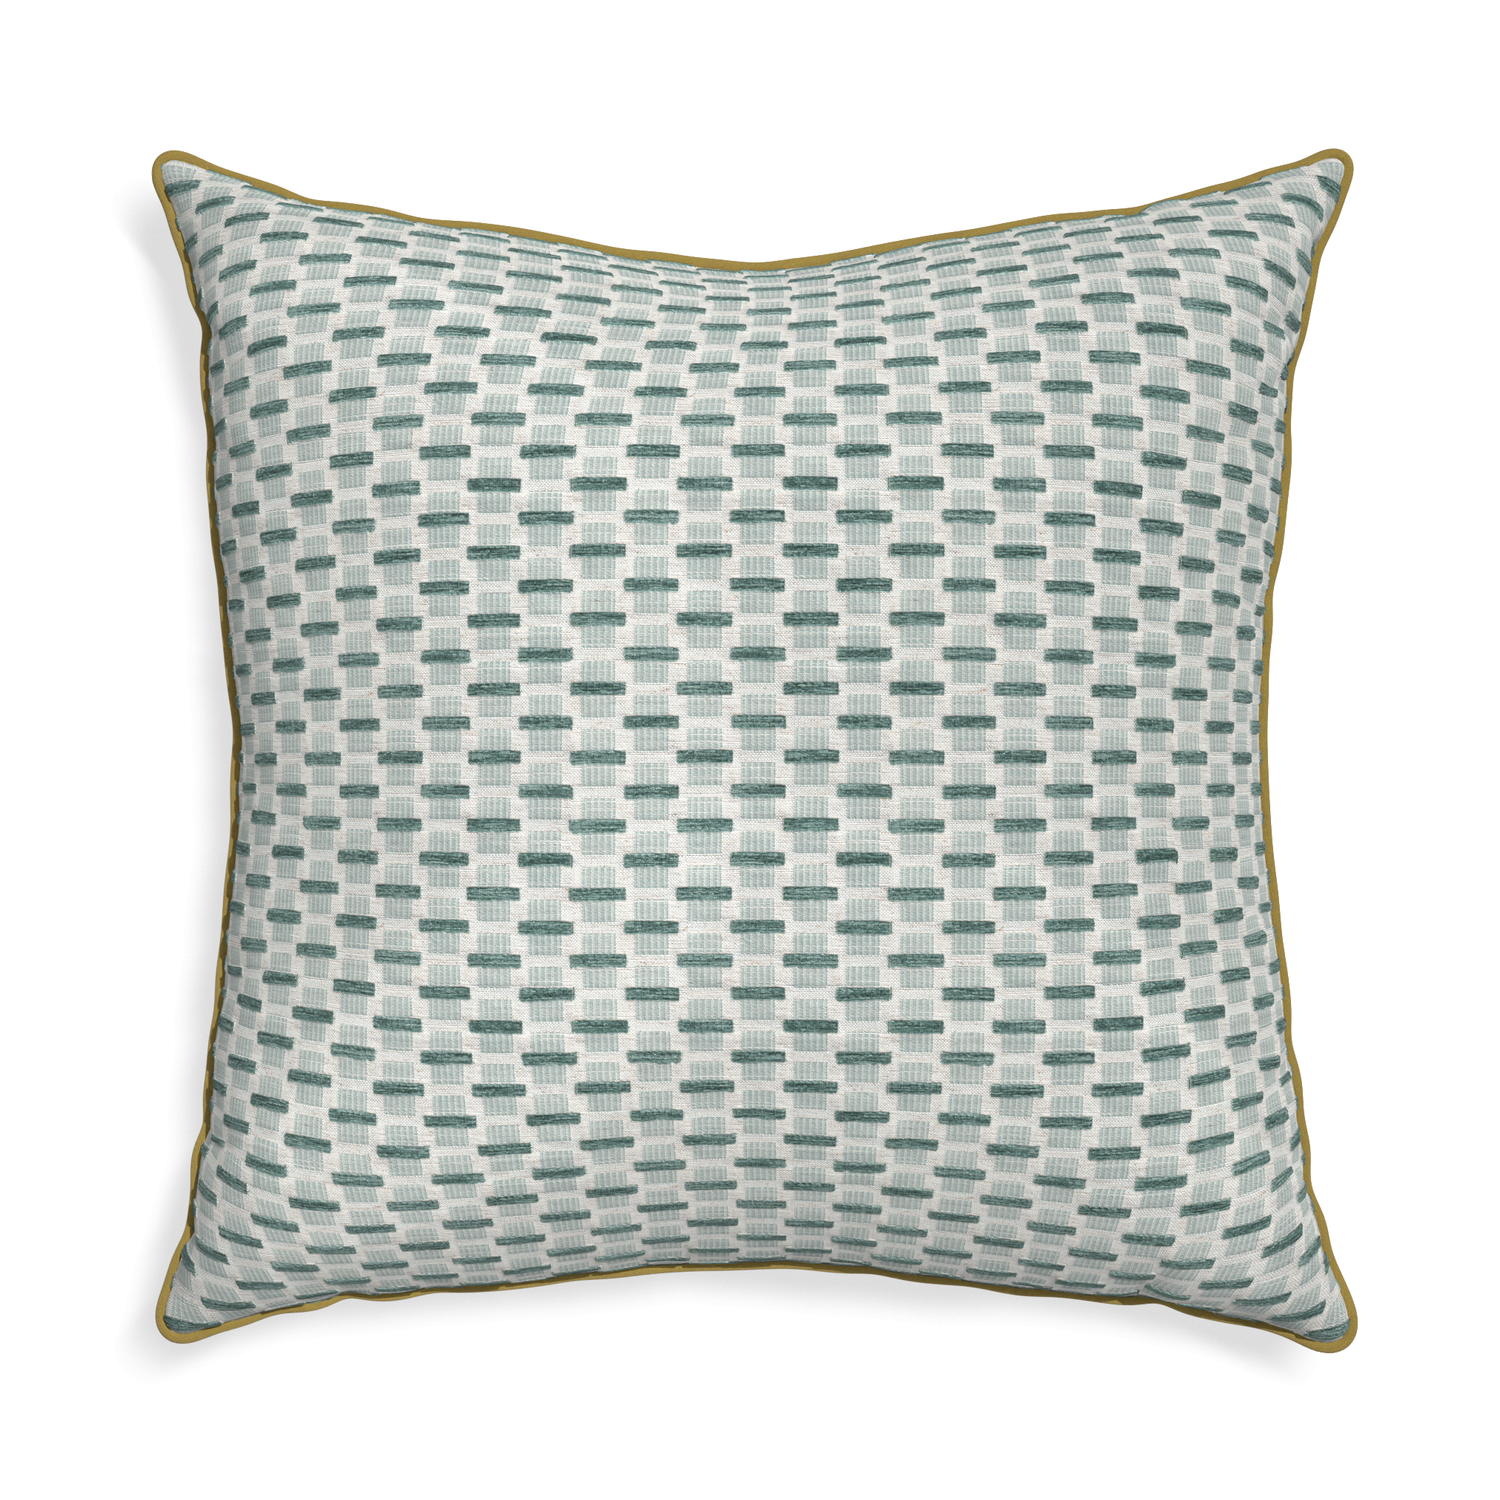 Euro-sham willow mint custom green geometric chenillepillow with c piping on white background